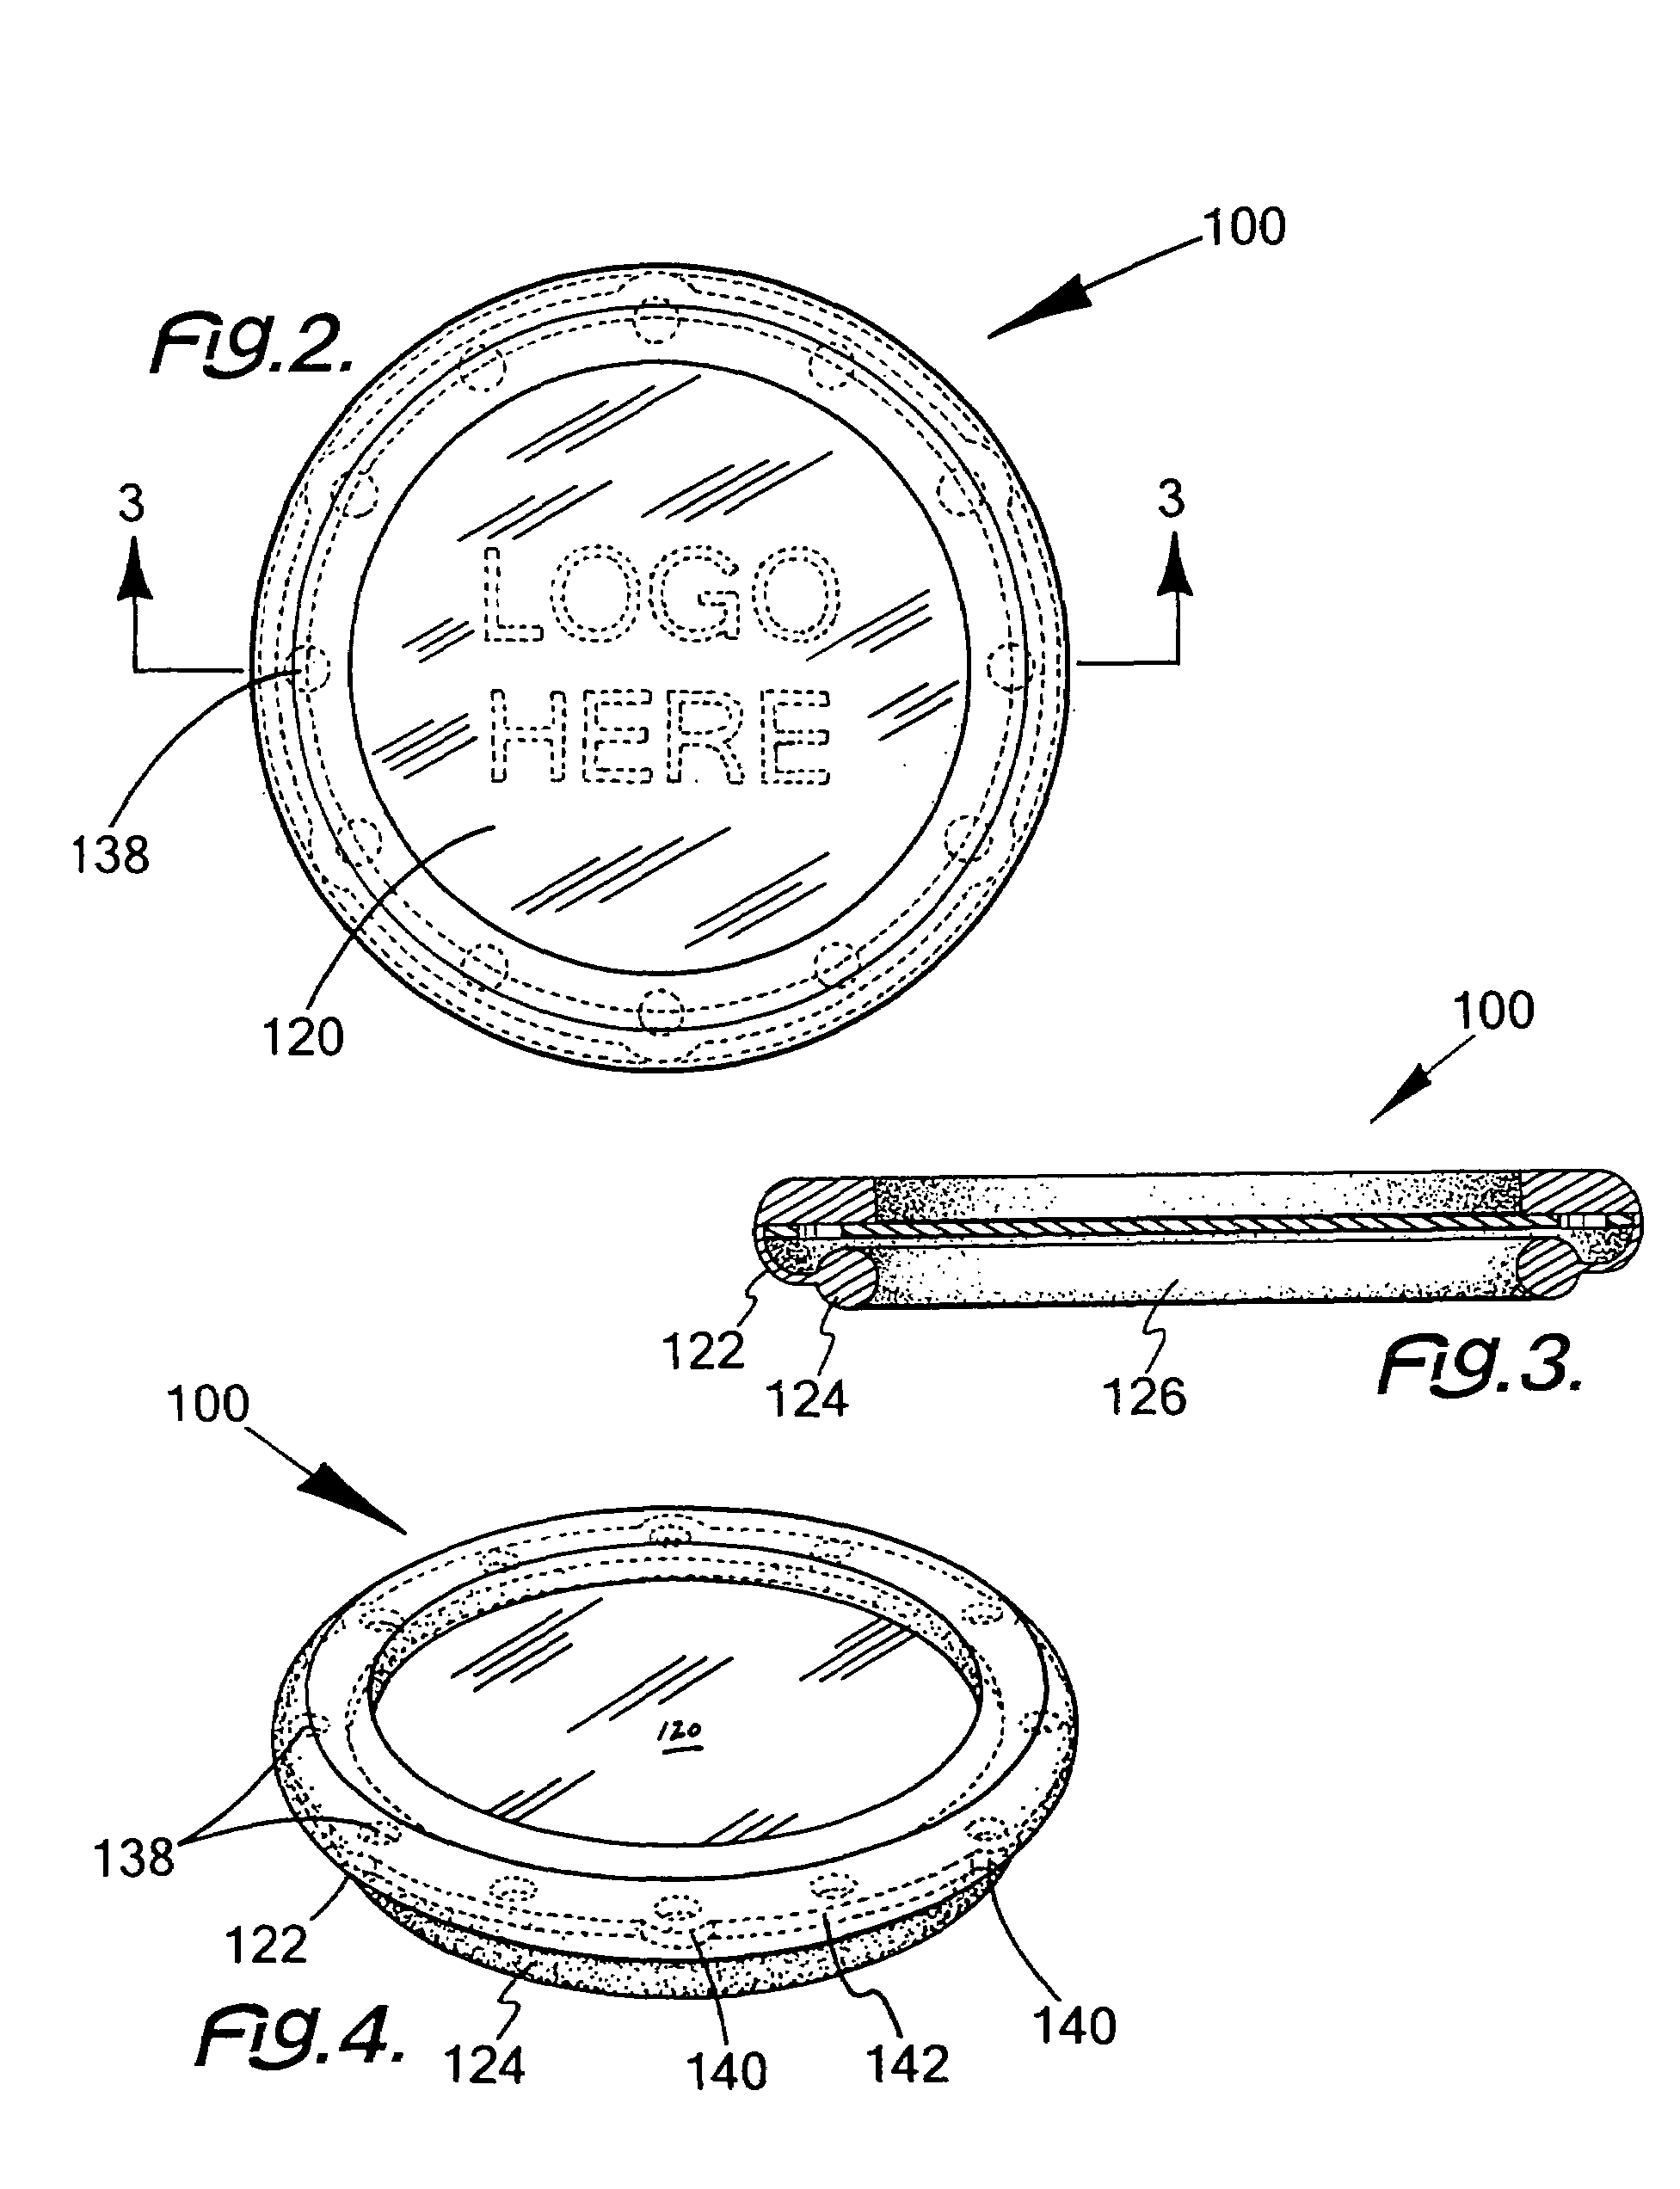 Cover for a bell or a diaphragm of a stethoscope